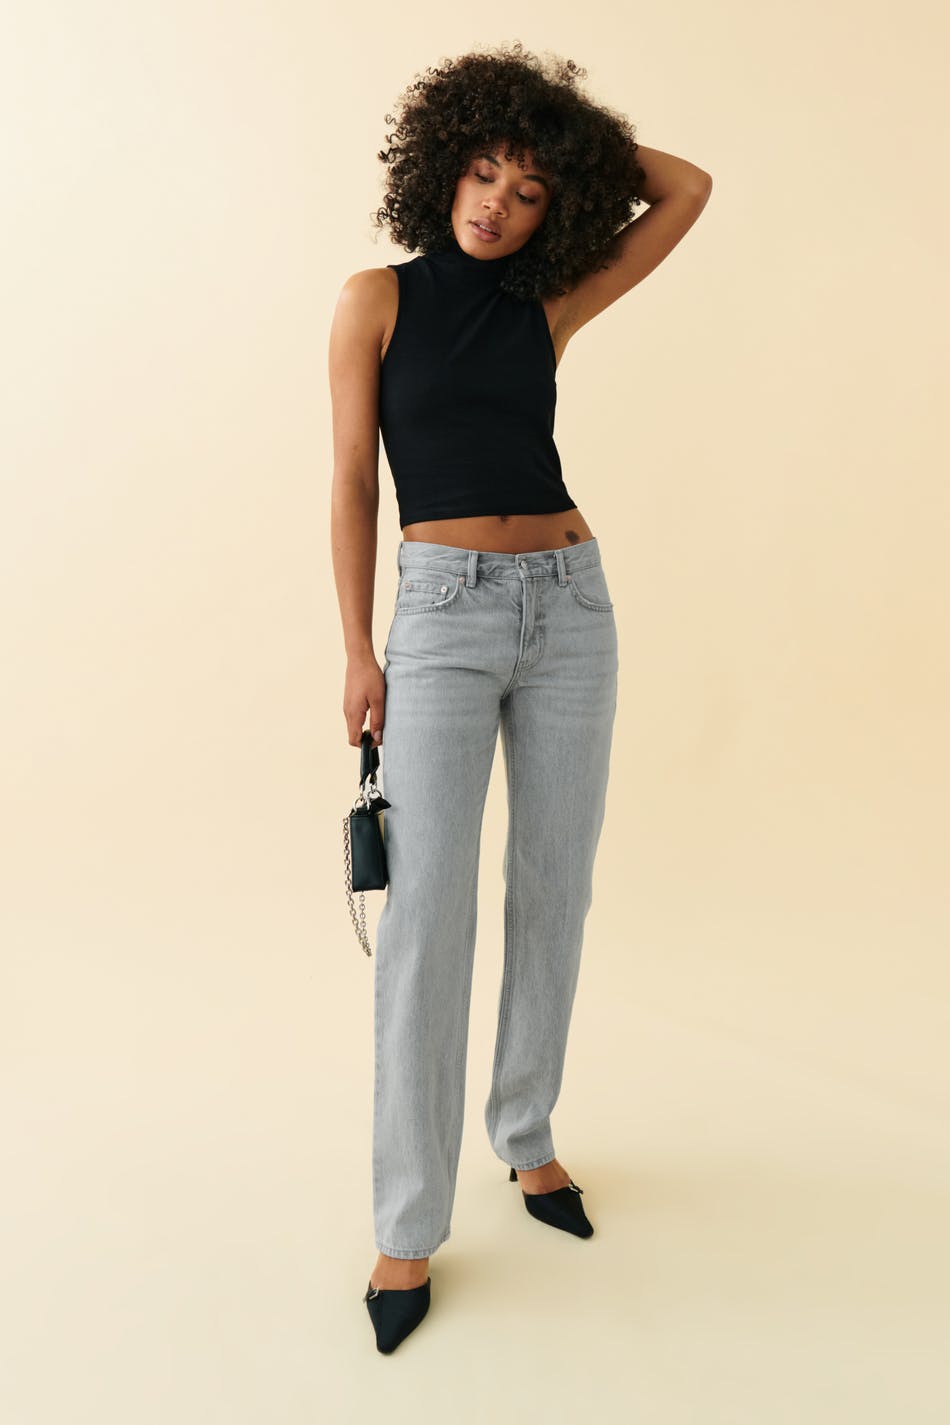 Jeans - clothing and fashion online - Gina Tricot